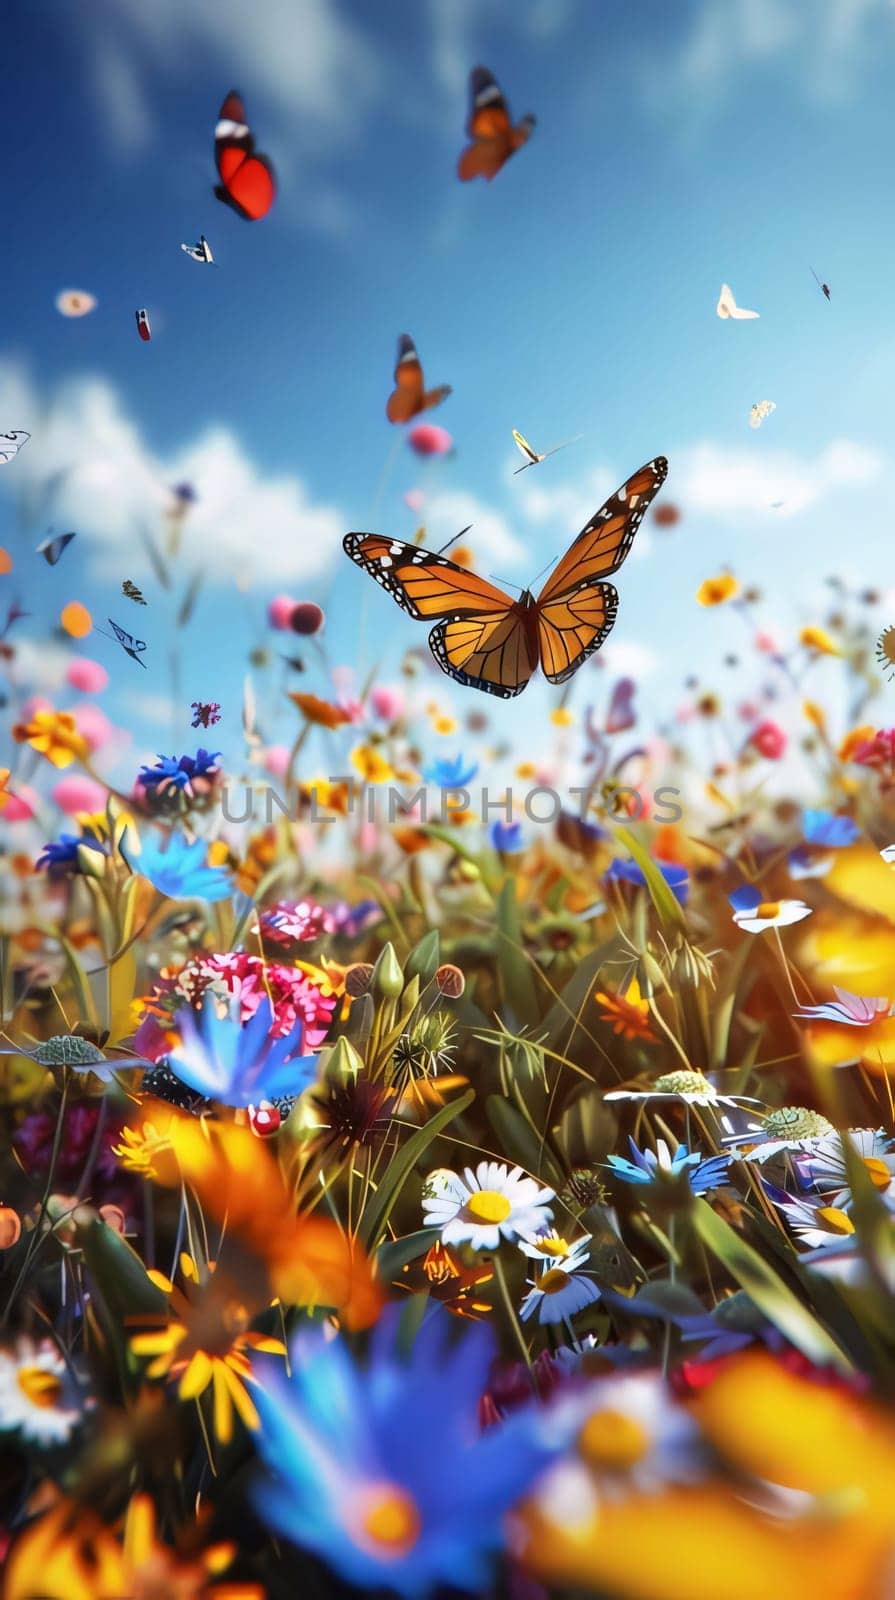 Beautiful spring illustration: Butterfly flying over a field of colorful wildflowers.